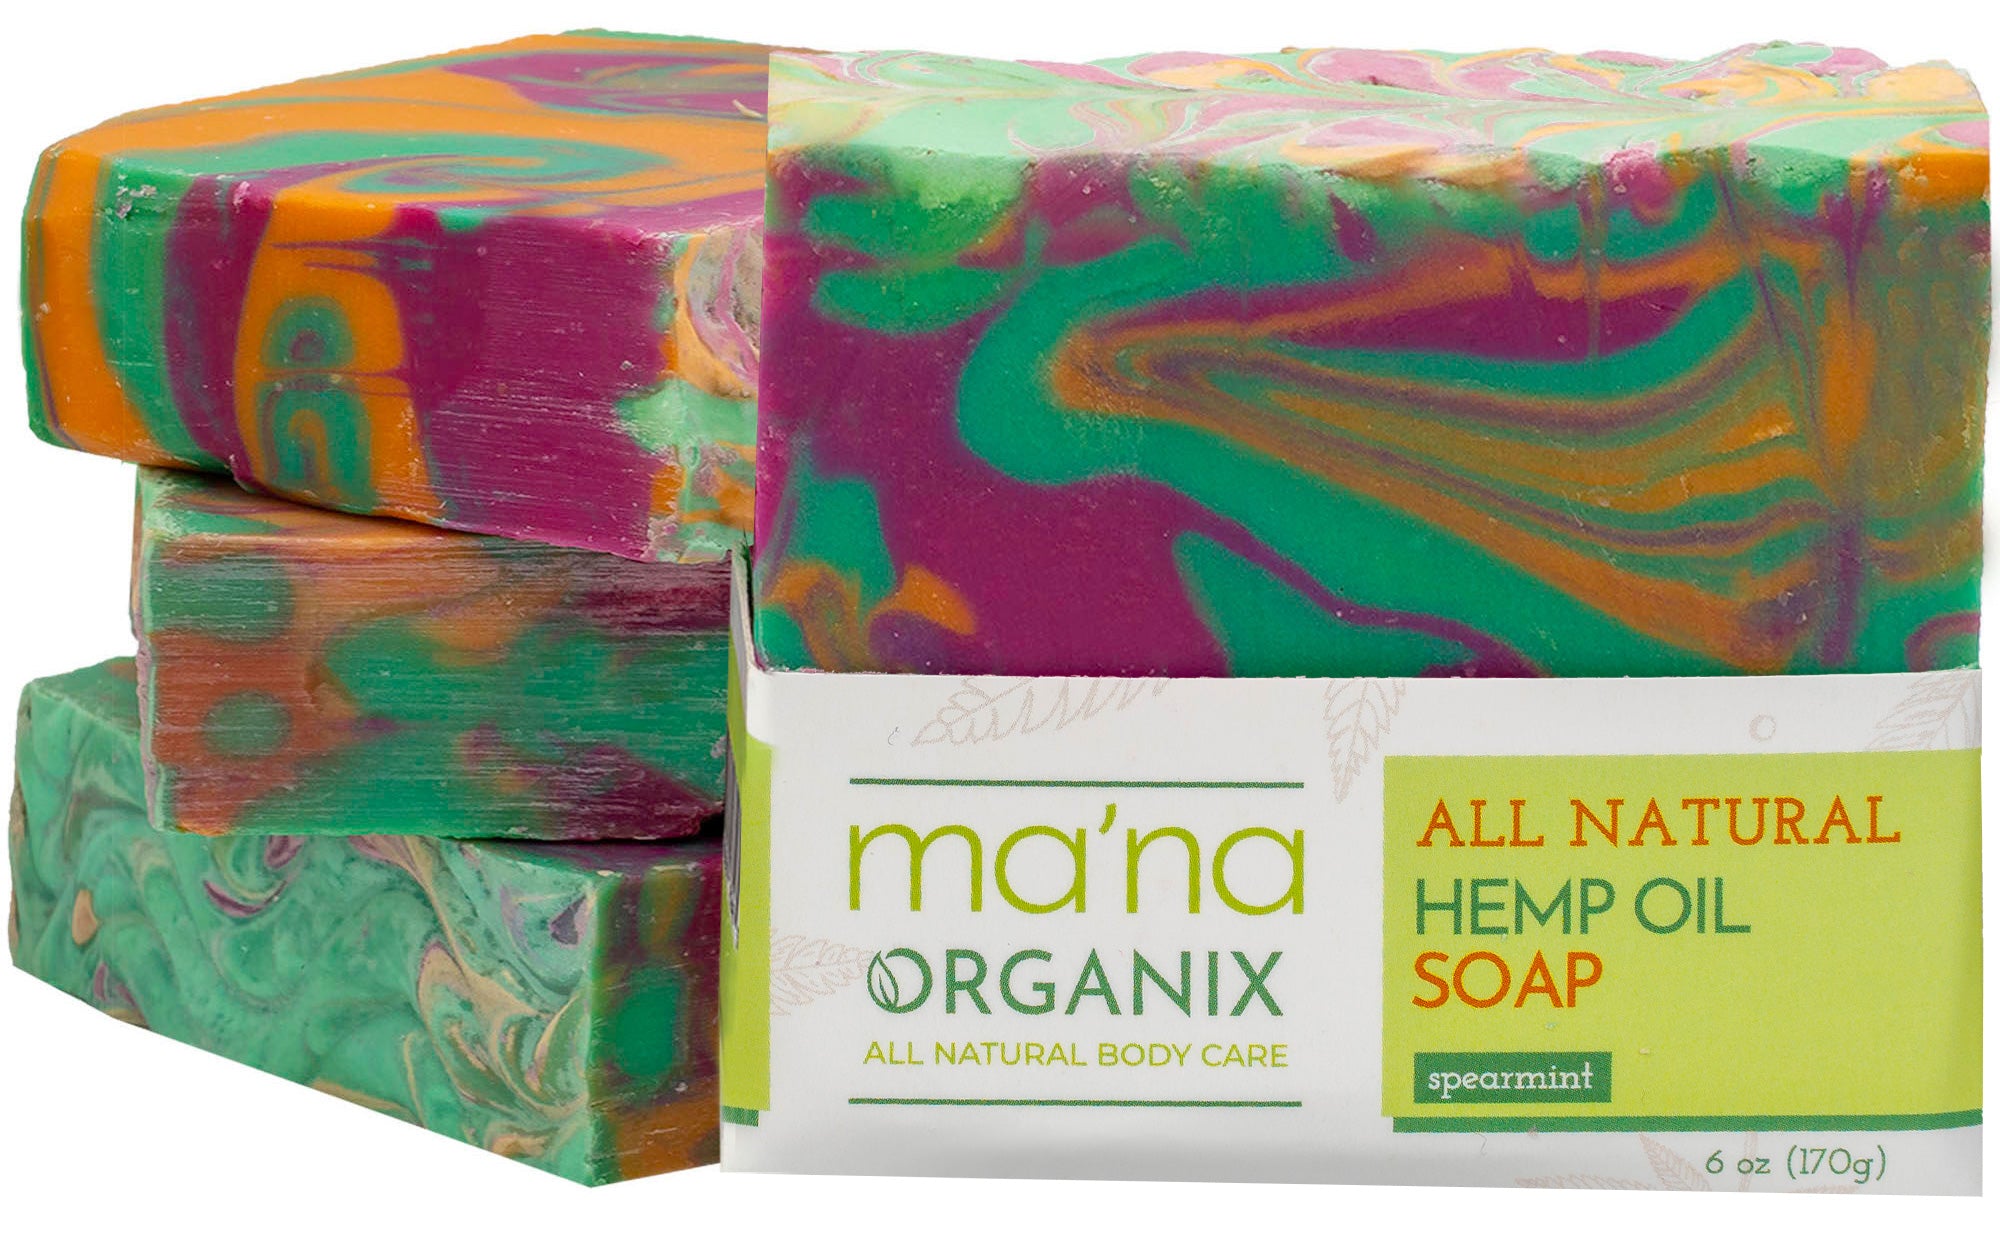 All Natural Hemp Oil & Spearmint Soap Bar with Ecofriendly and Biodegradable Packaging (6 oz.)